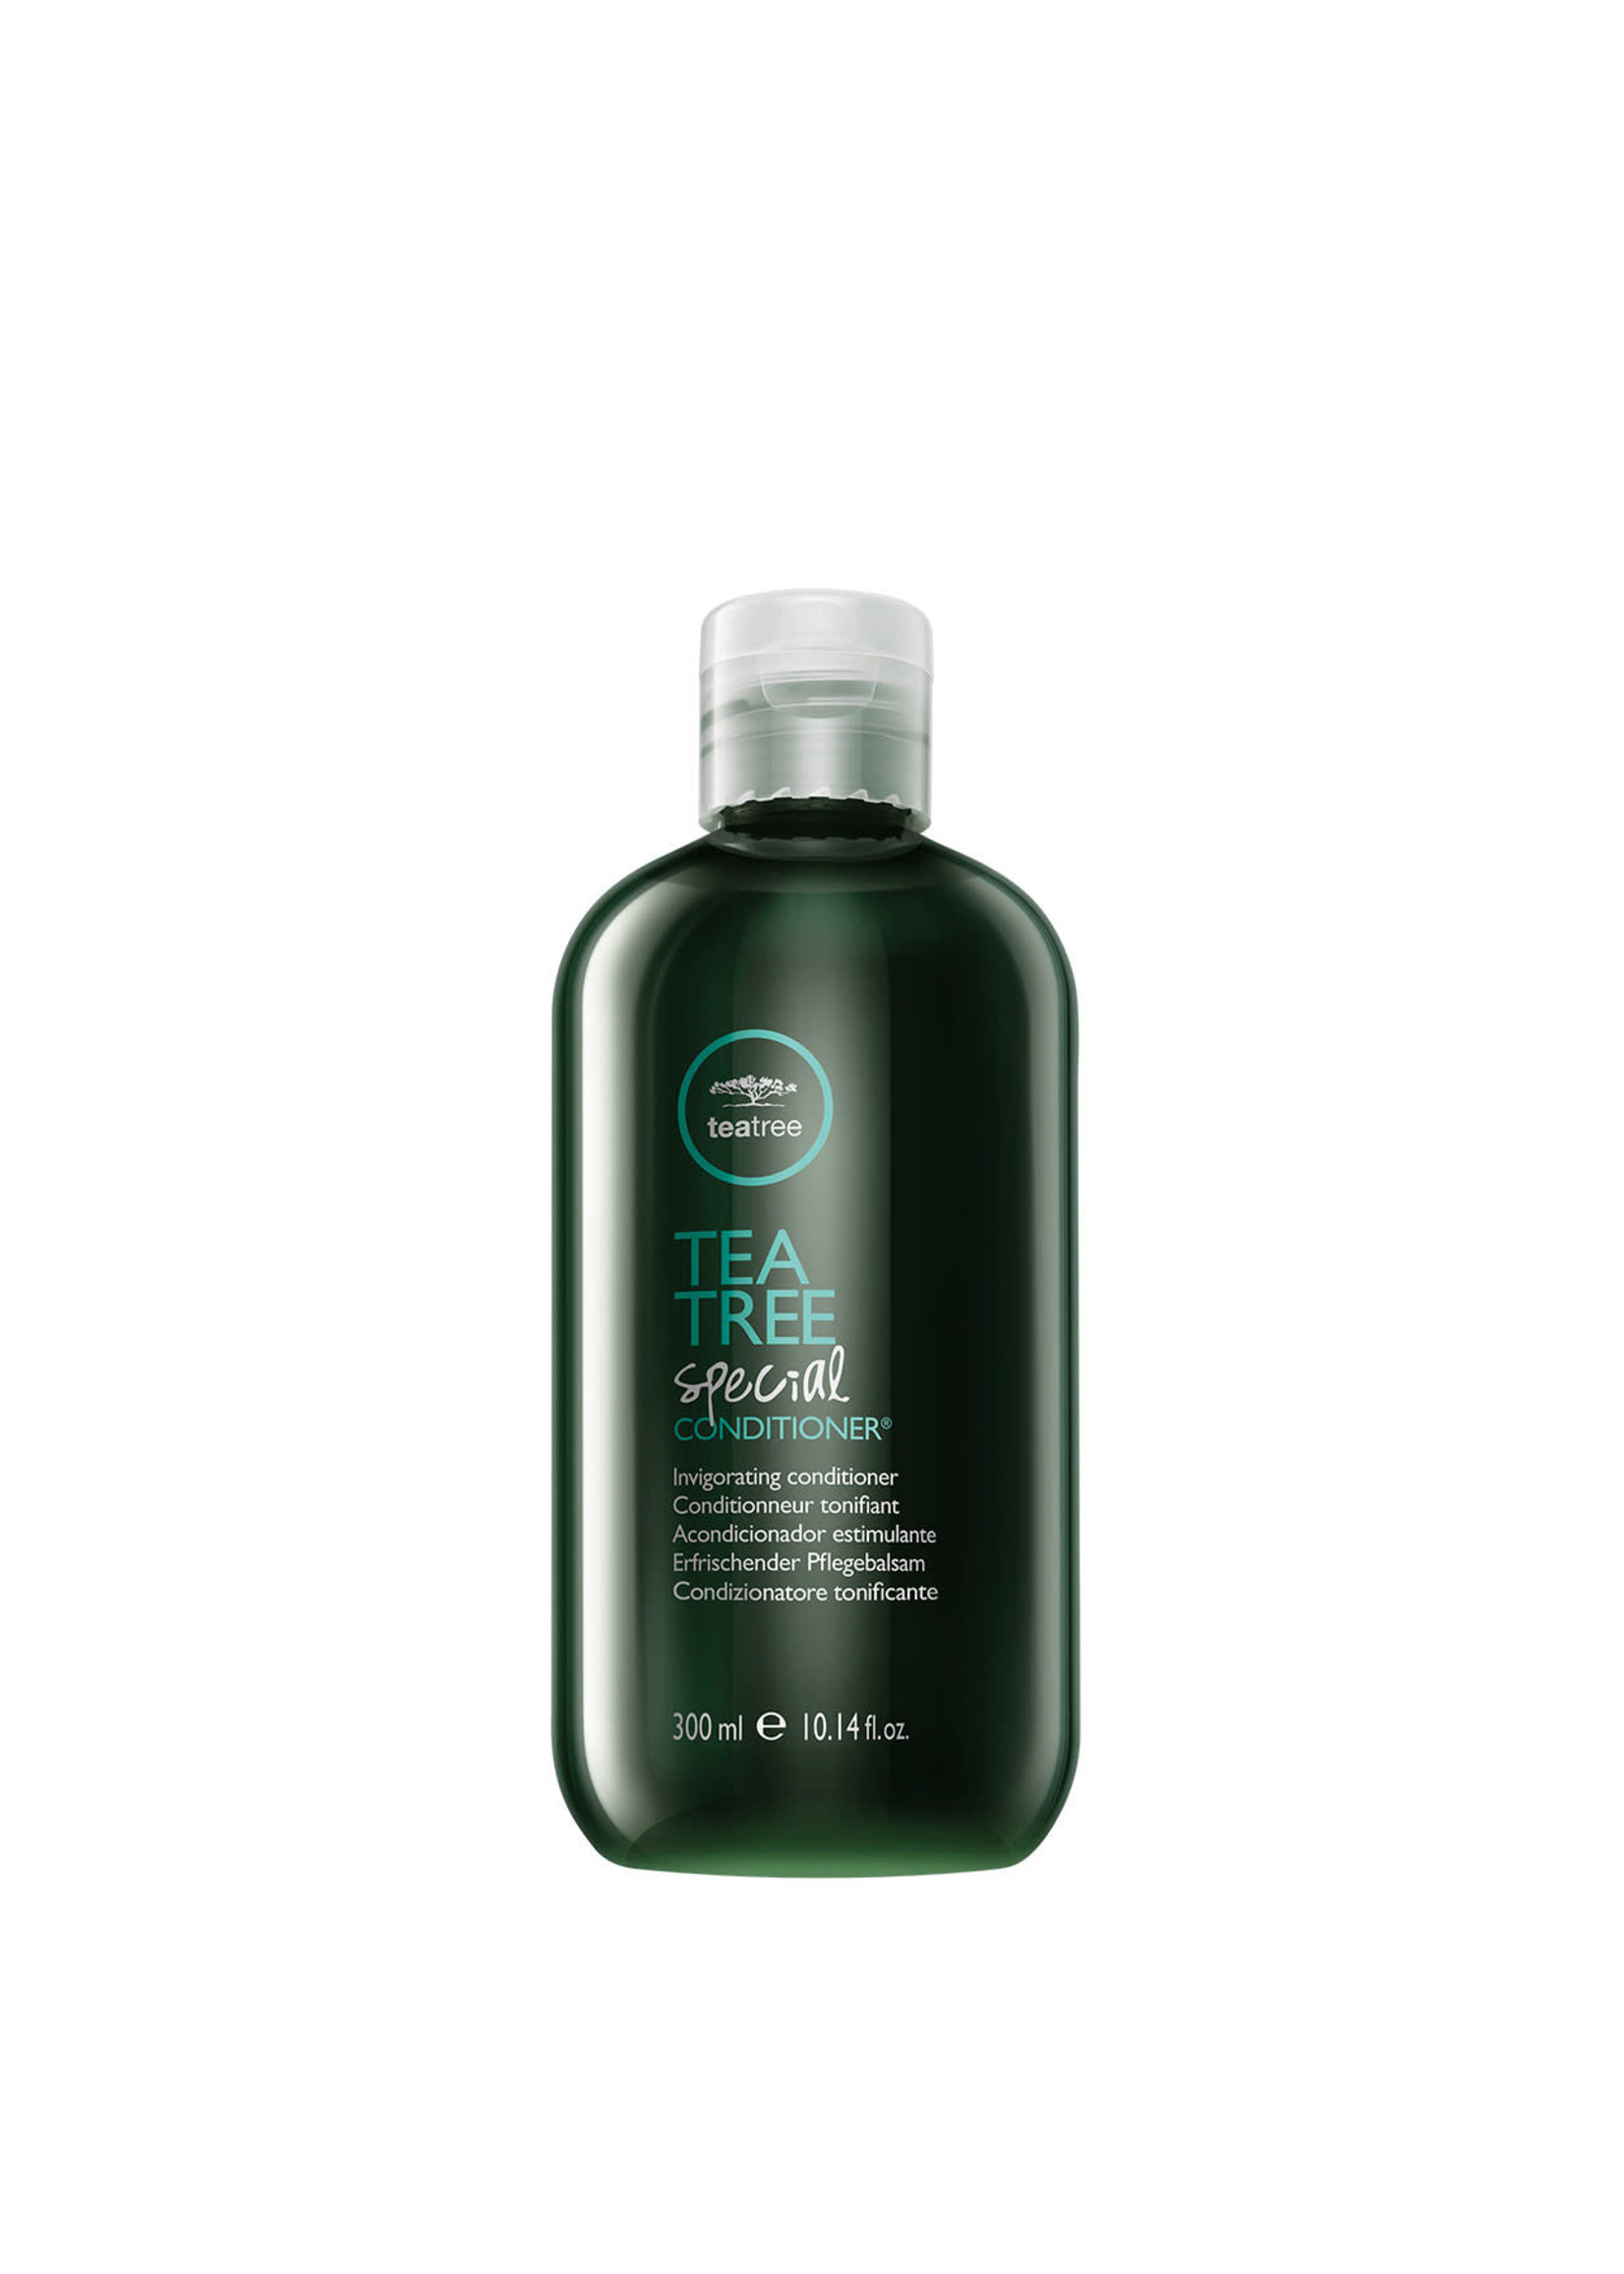 Paul Mitchell Paul Mitchell Tea Tree Special Conditioner 300ml